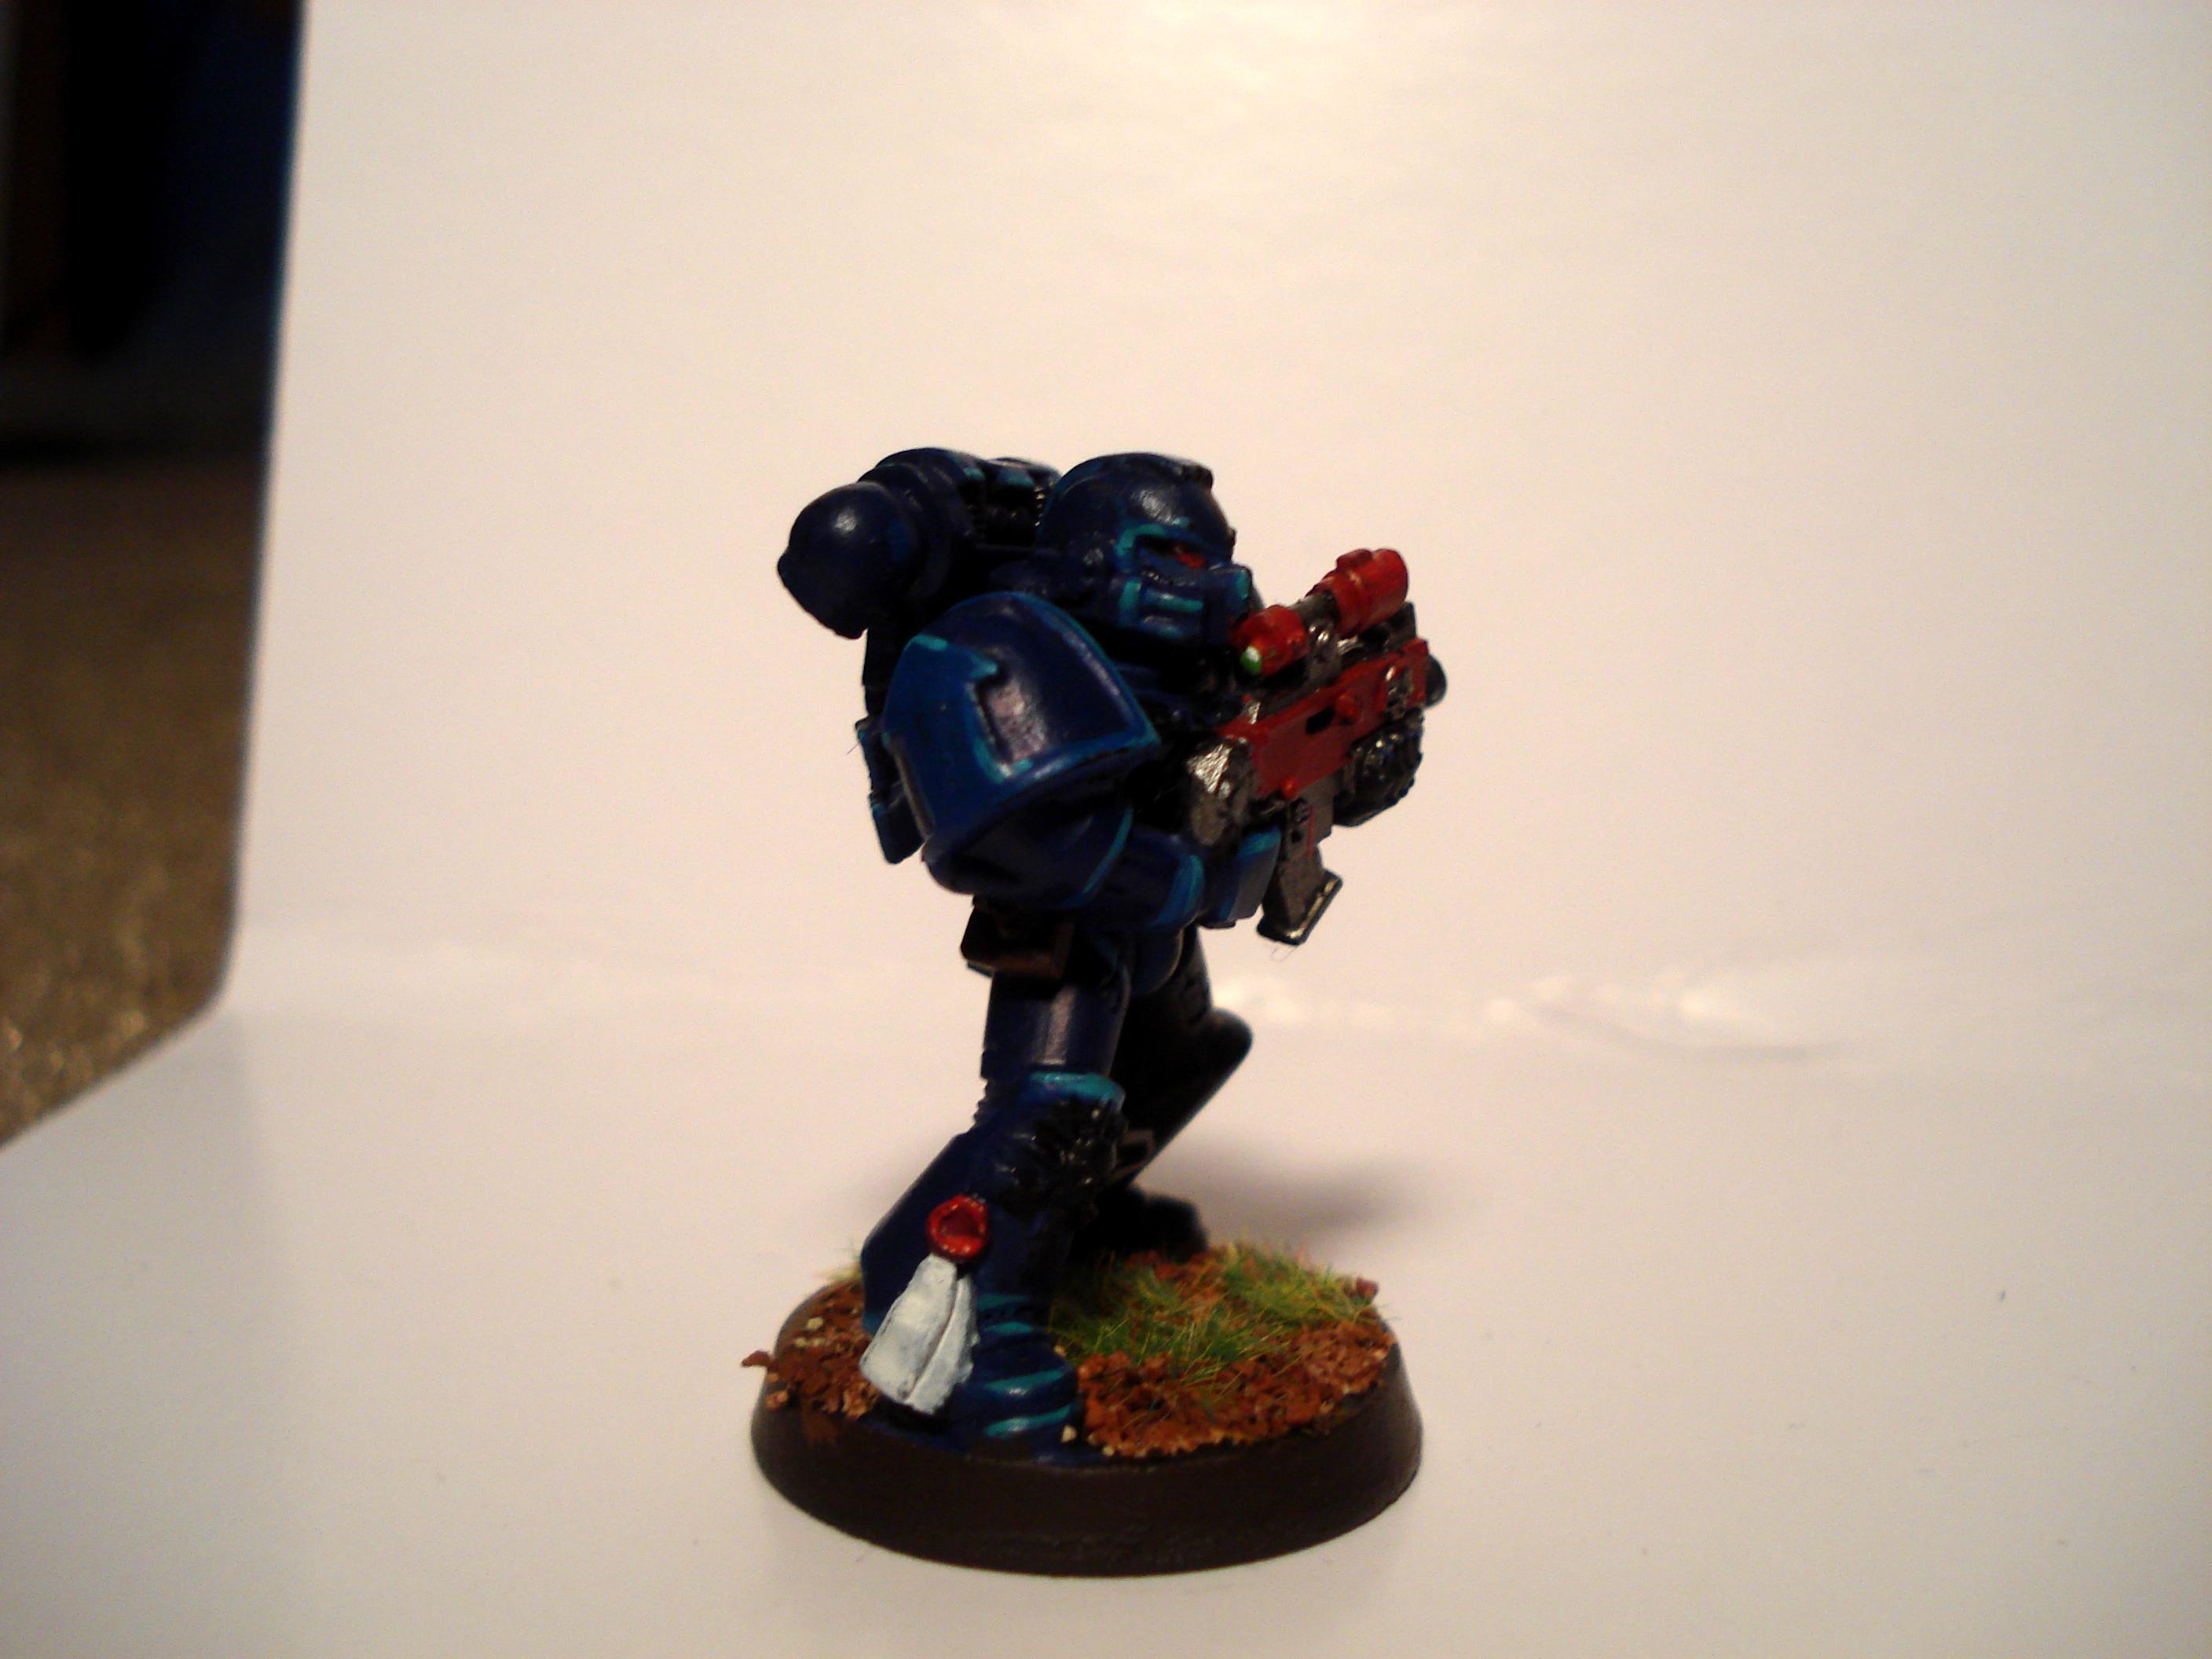 1st space marines right side